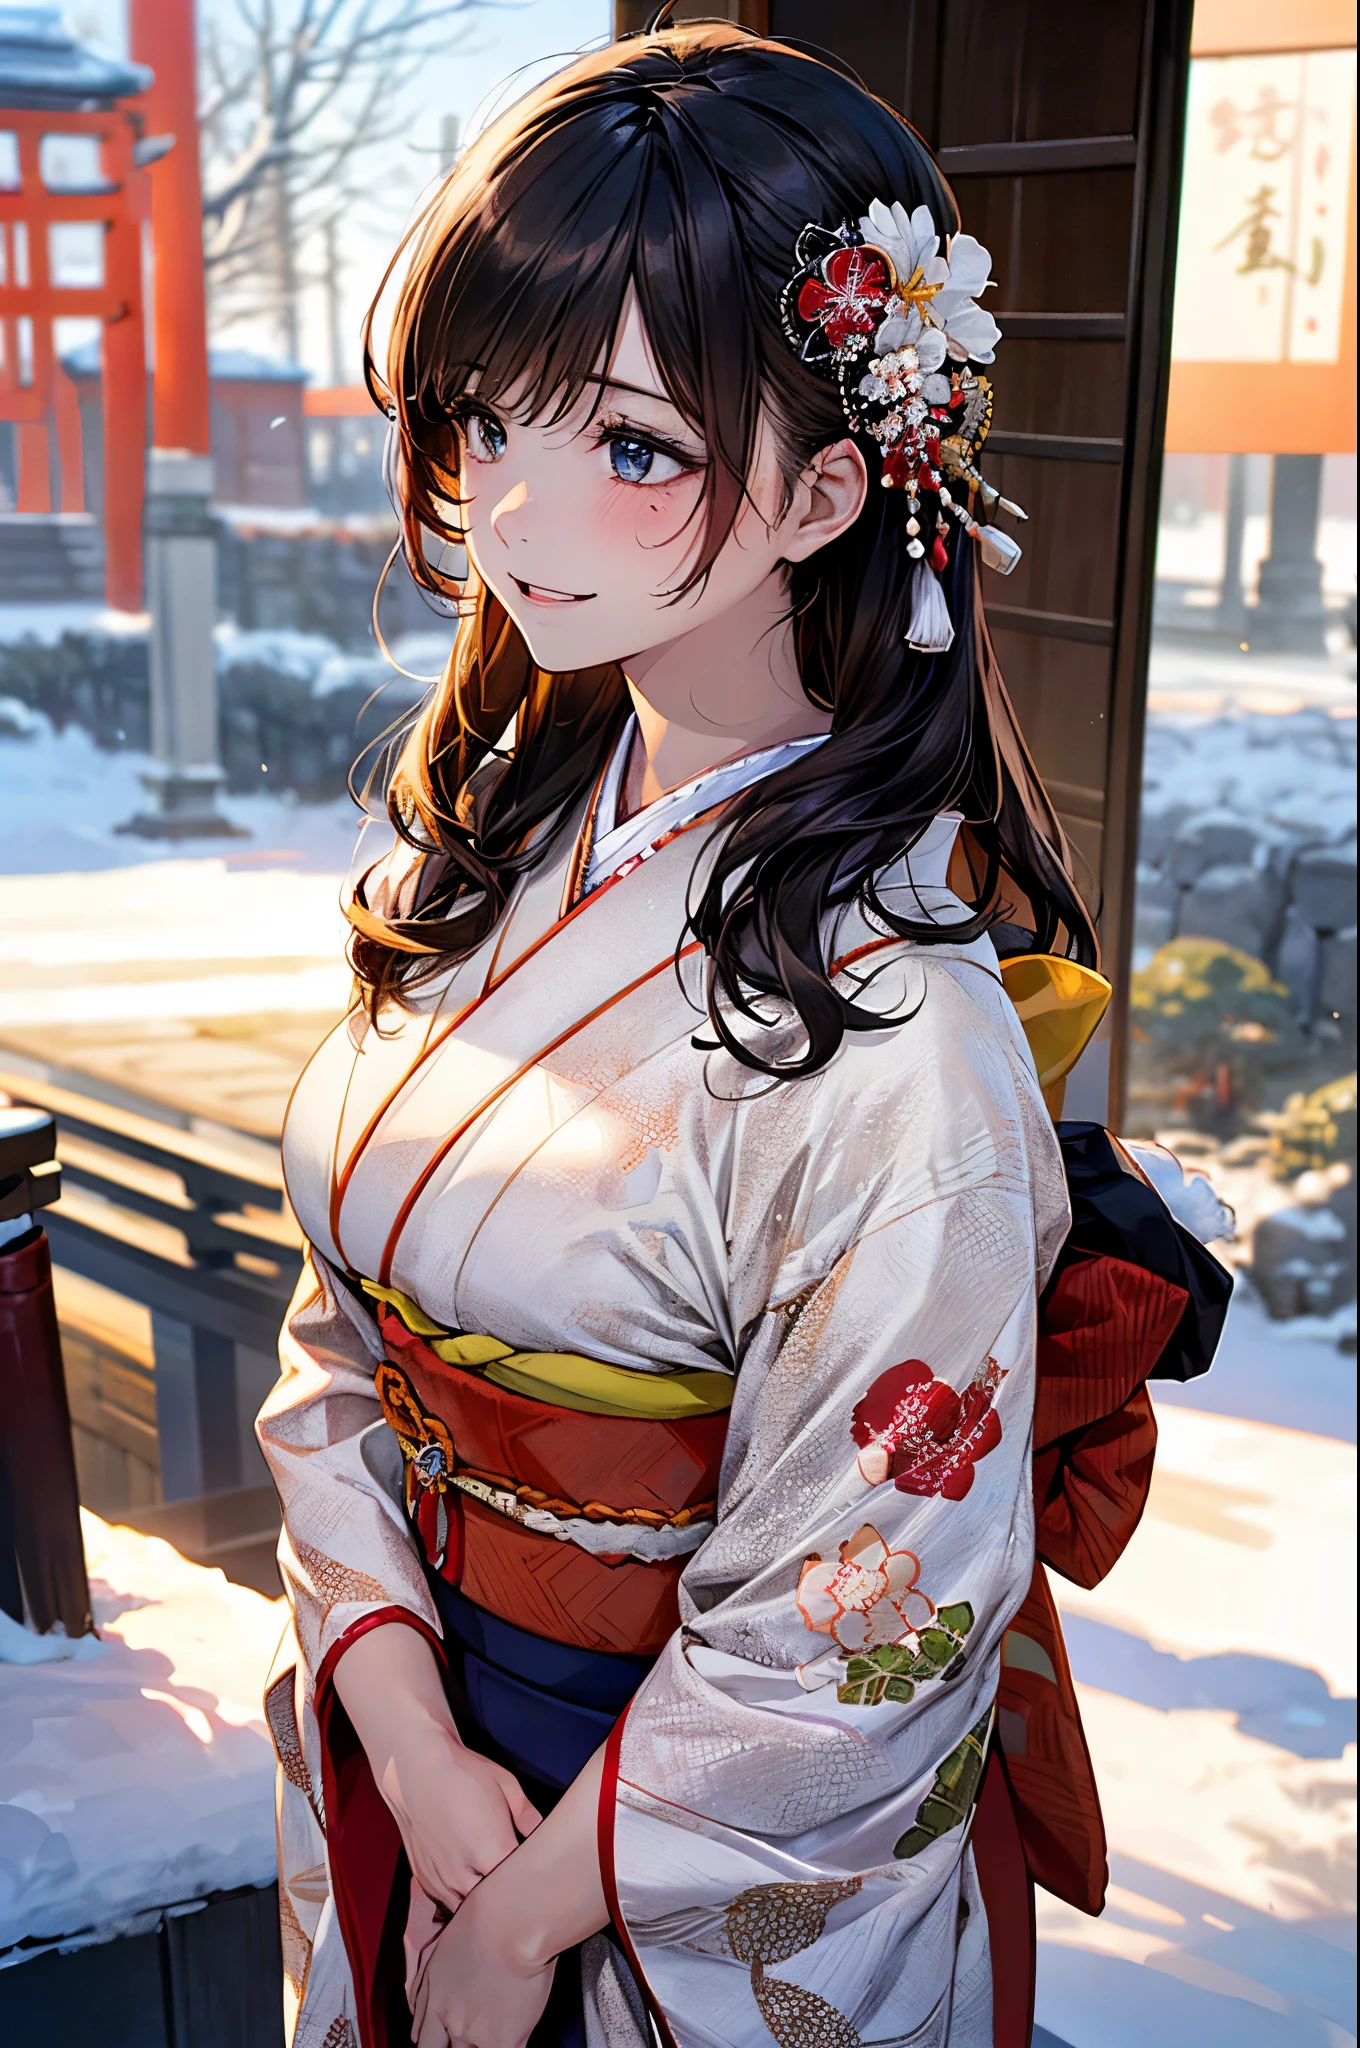 ((perfect anatomy, anatomically correct, super detailed skin)), 
1 girl, japanese, high school girl, shiny skin, large breasts:0.5, looking away, looking up, watching the view, from below, 
beautiful hair, beautiful face, beautiful detailed eyes, (middle hair:1.5, japanese hair:1.5), black hair, blue eyes, babyface, mole under eye, 
((red floral kimono, hair ornament)), 
((smile:1.5, open your mouth wide)), walking, 
(beautiful scenery), winter, dawn, (new year's day, first visit), hokkaido, sapporo, outside hokkaido shrine, crowd, snow, snowfall:1.5, freezing weather, frost, 
(8k, top-quality, masterpiece​:1.2, extremely detailed), (photorealistic), beautiful illustration, natural lighting,